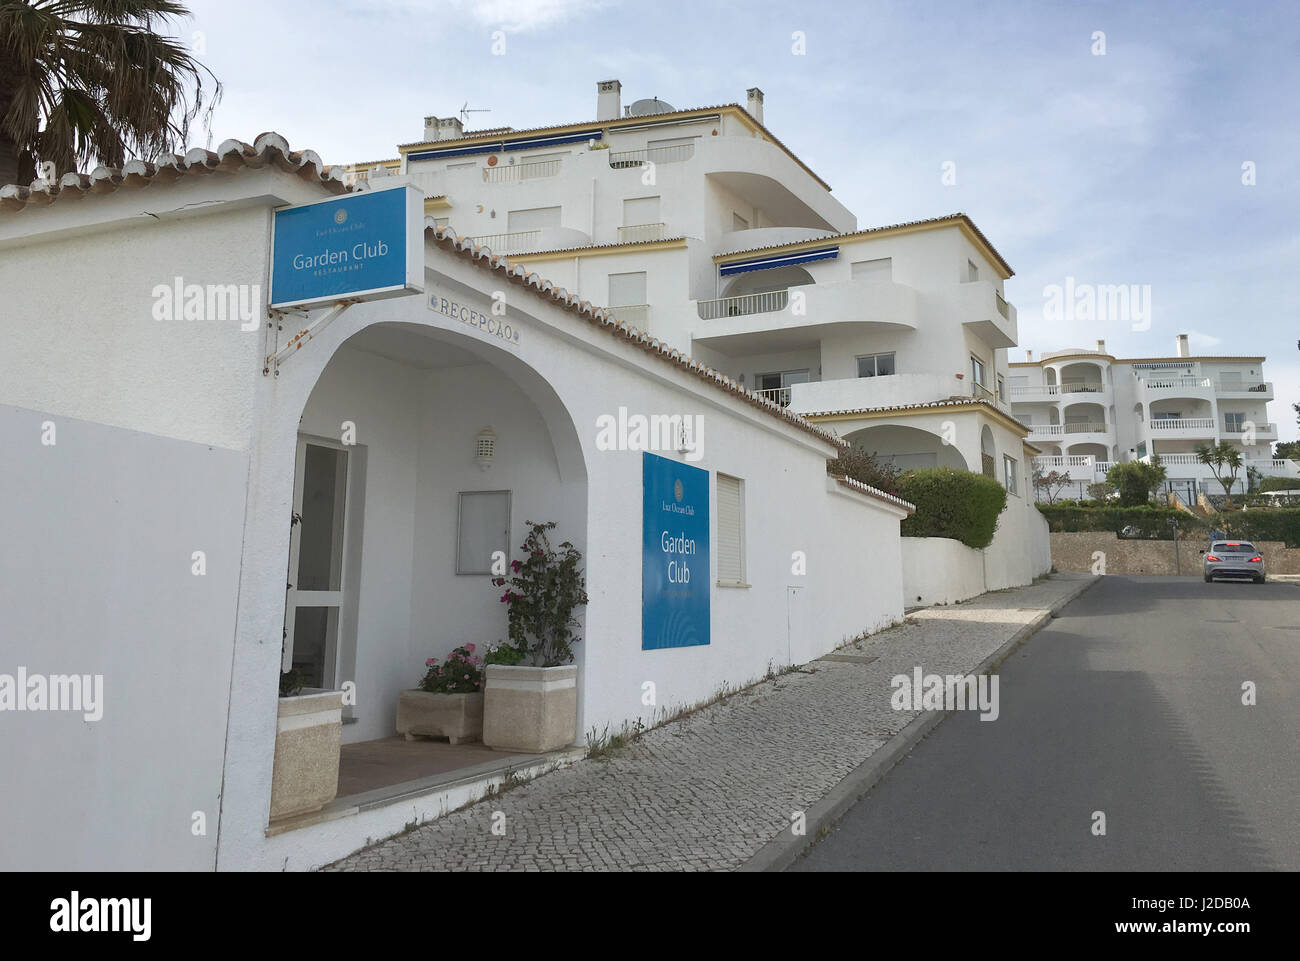 The apartment hotel in Luz, department of Lagos, Portugal, from which Madeleine McCann (Maddie) disappeared on 03 May 2007, pictured on 25 April 2017. The case remains unsolved. Photo: Emilio Rappold/dpa Stock Photo